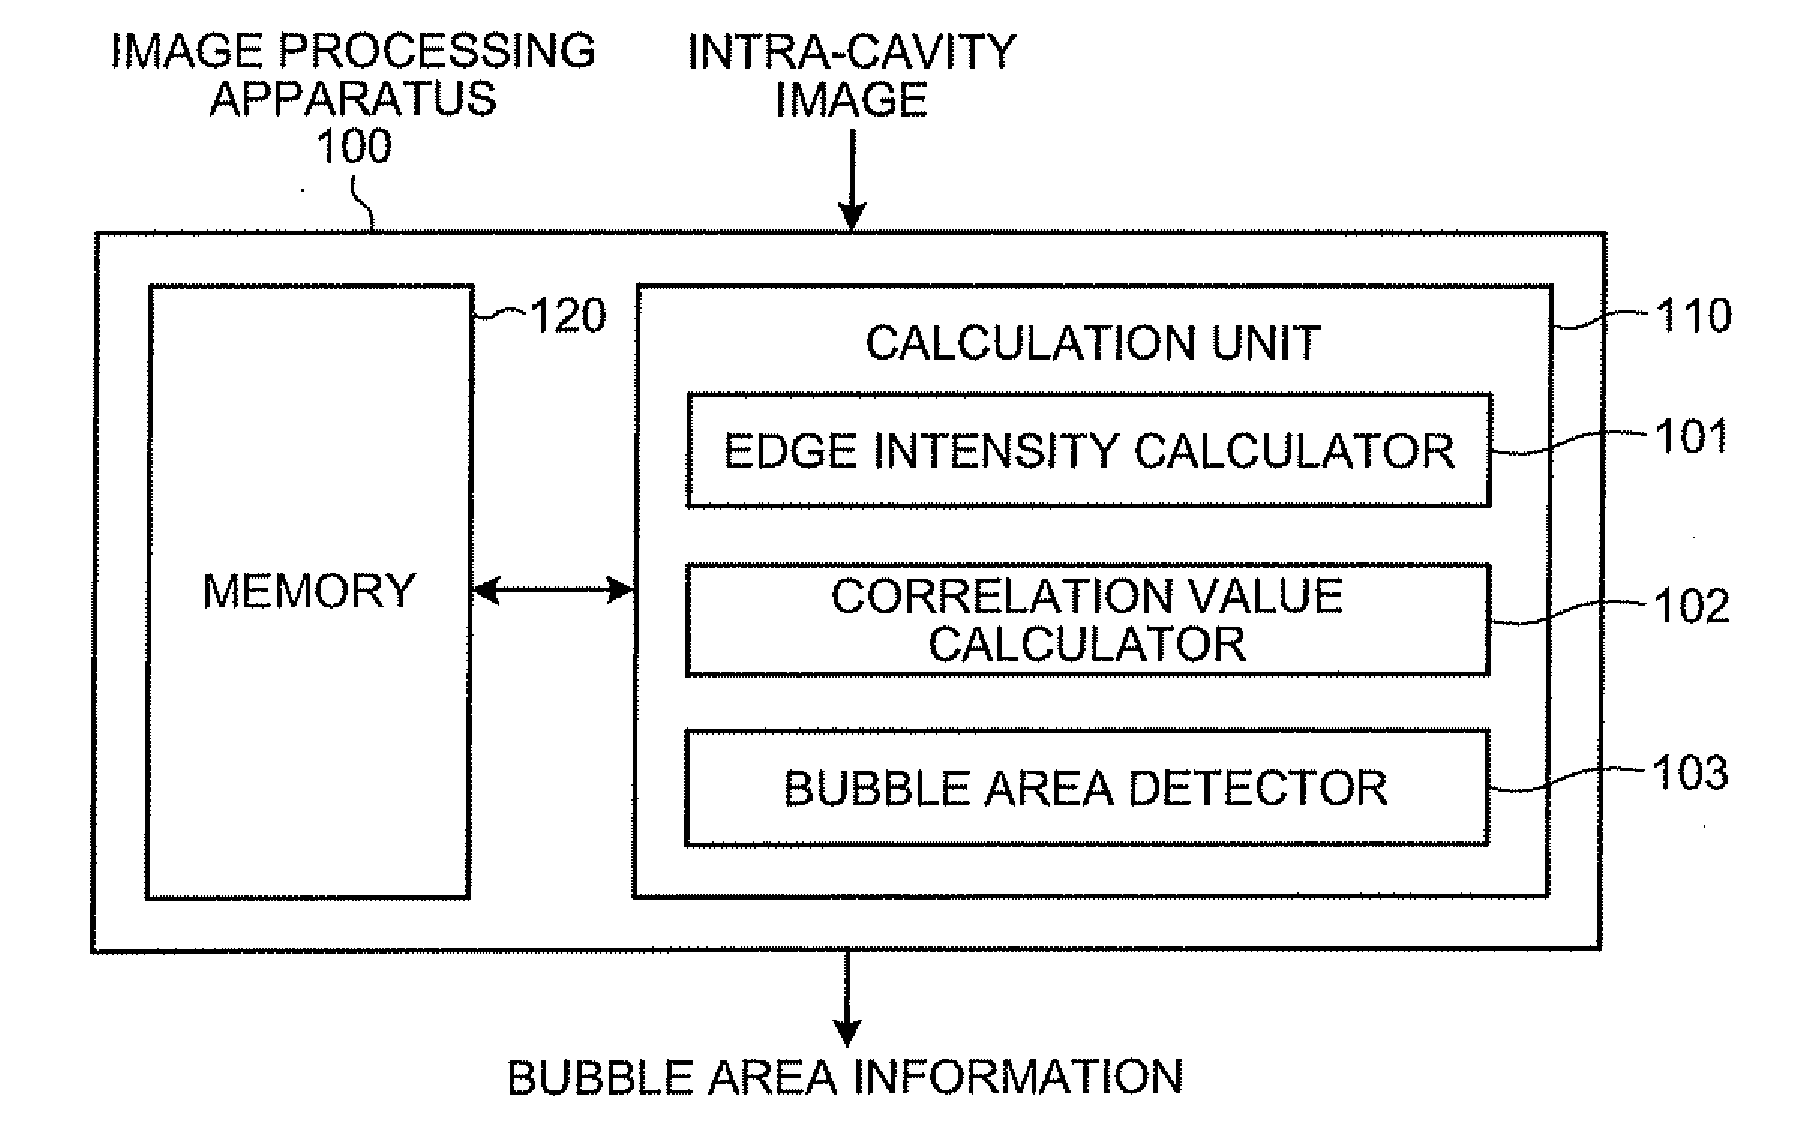 Image processing apparatus, image processing method, and image processing program product